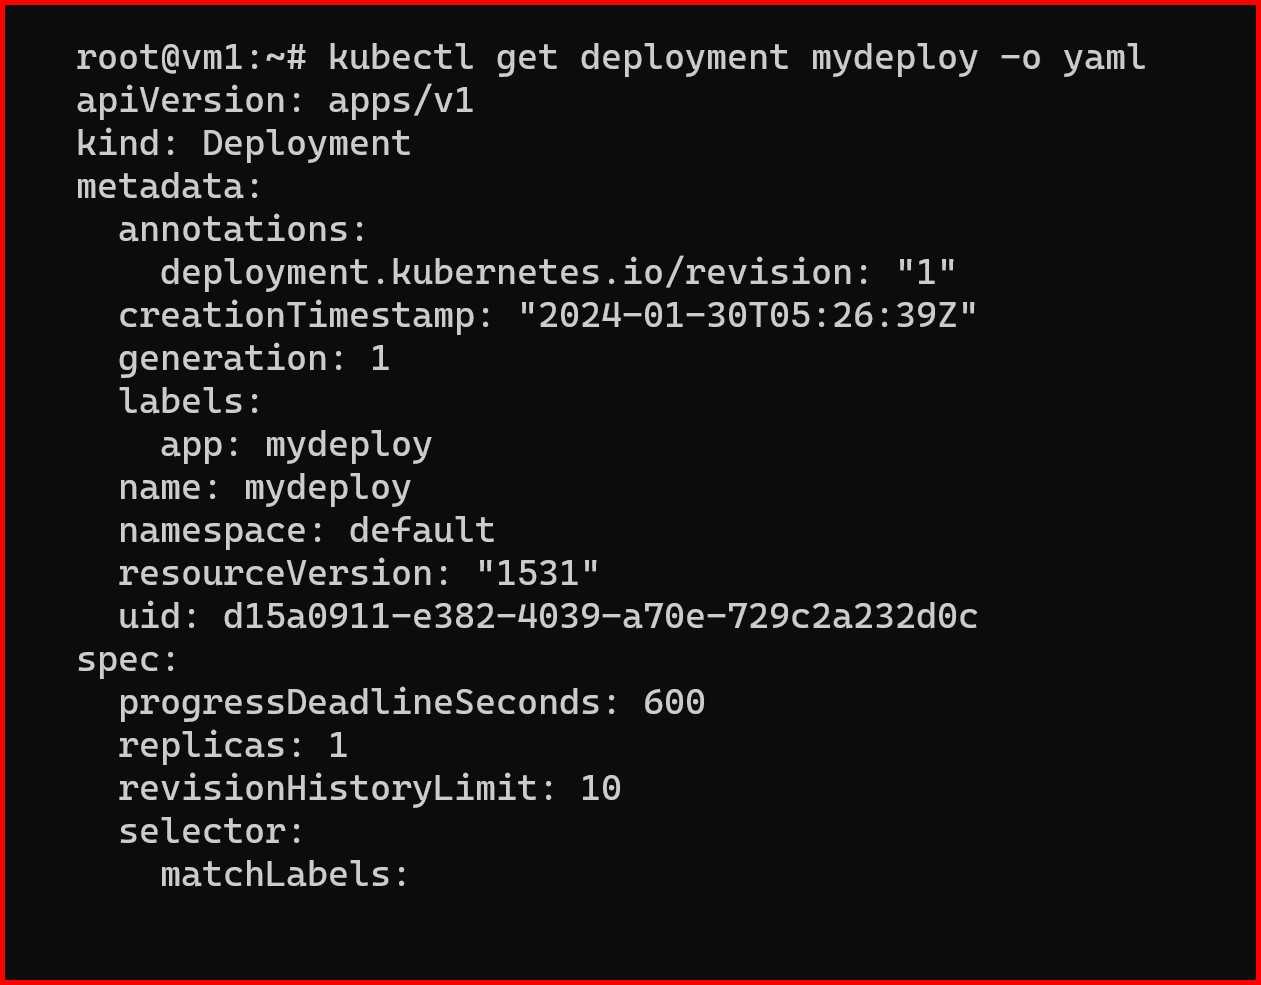 Picture showing the yaml of the deployment